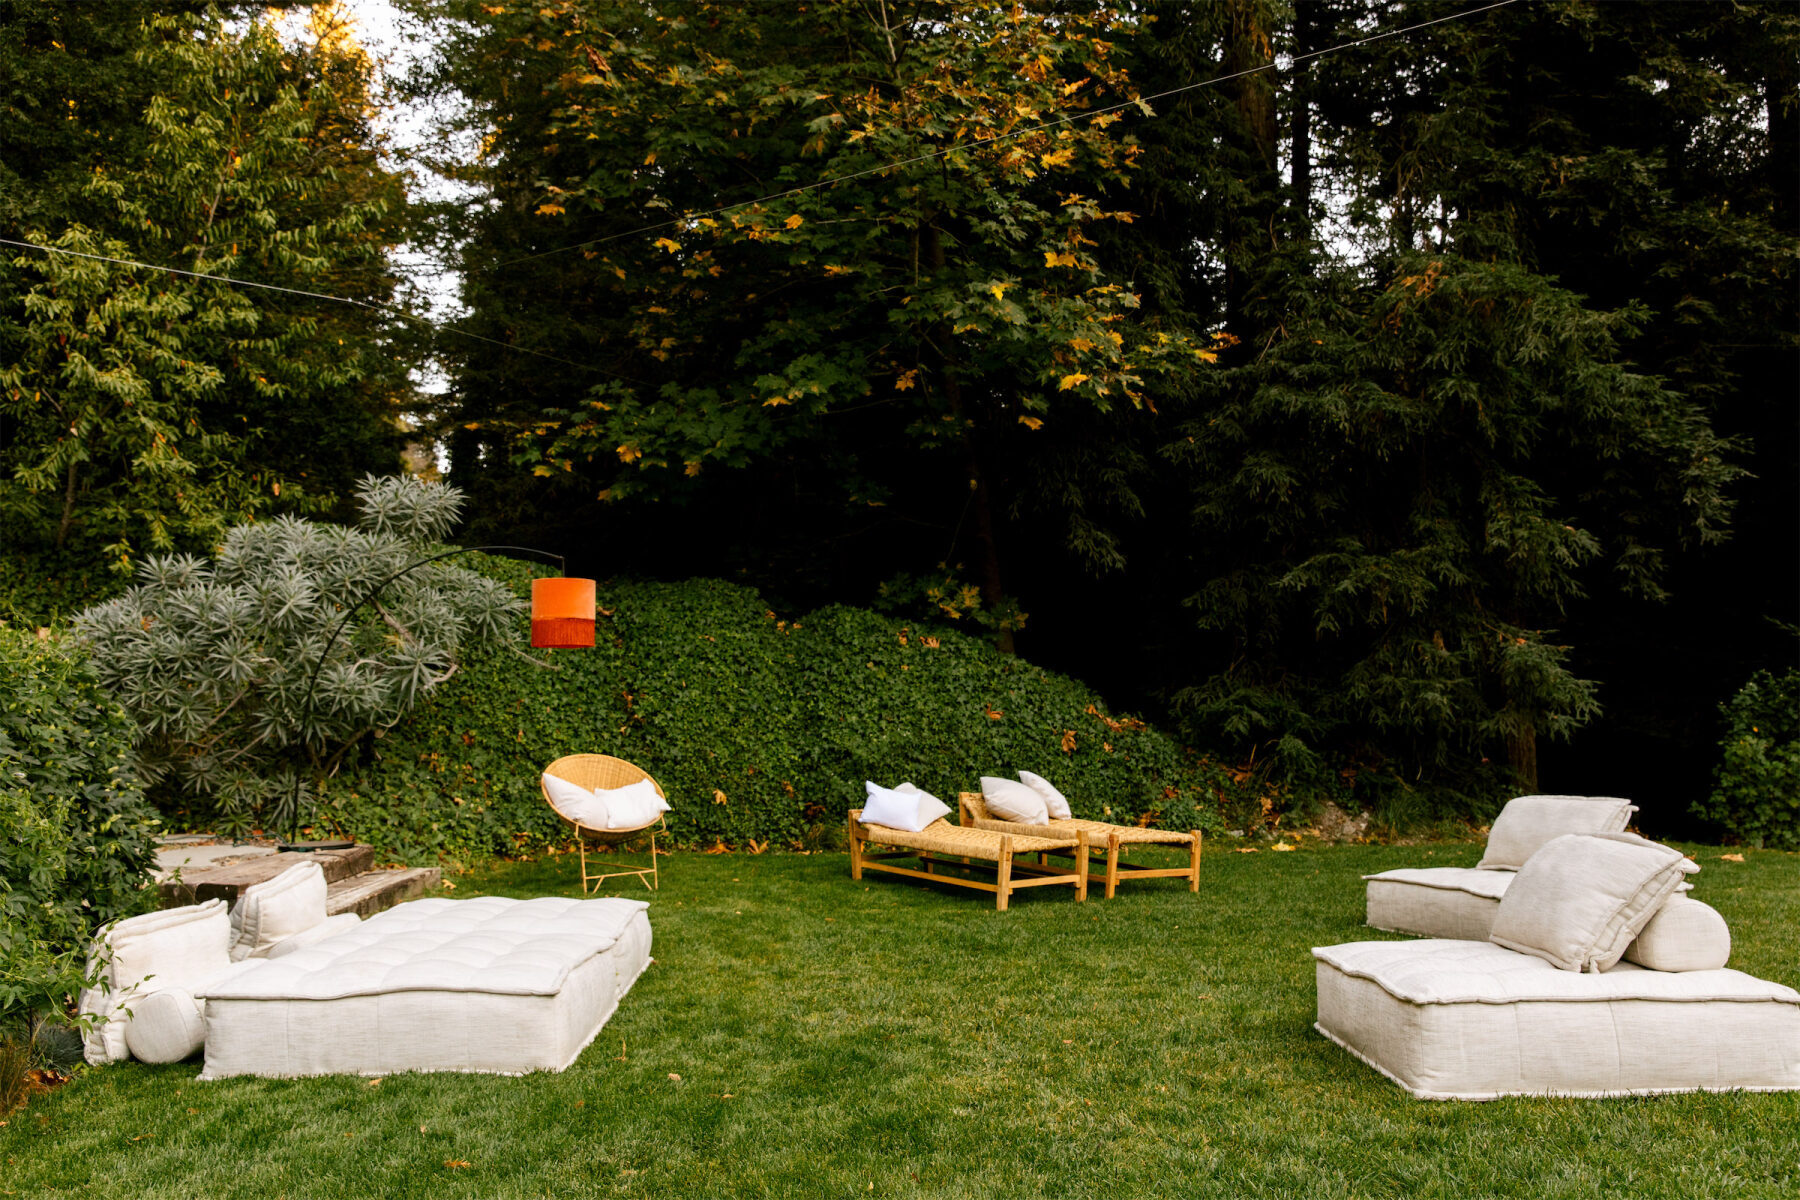 At a Big Sur wedding, the lawn was used for lounge areas during cocktail hour.